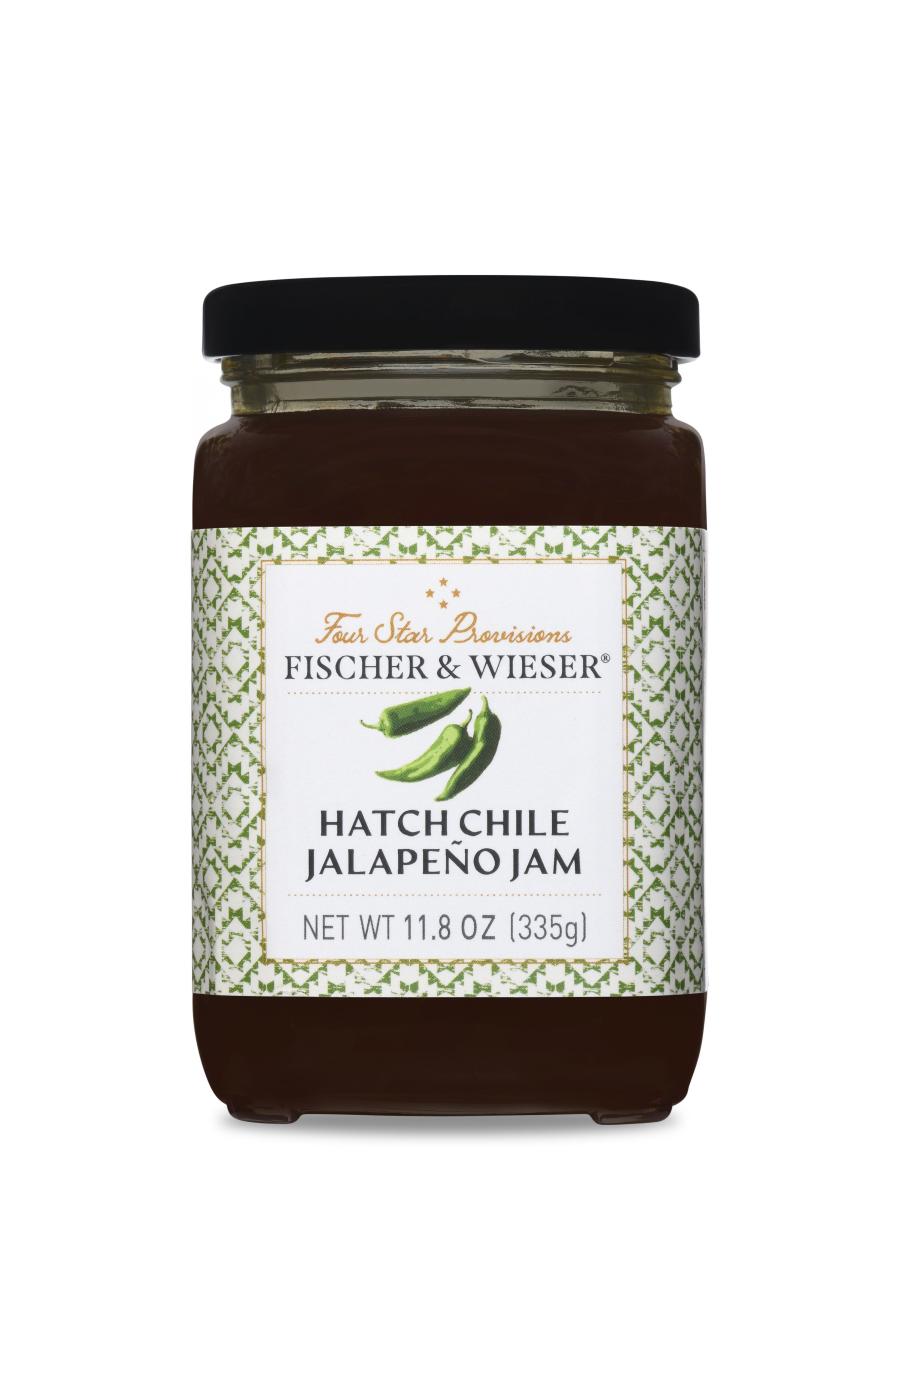 Fischer & Wieser Four Star Provisions Hatch Chile Jalapeno Jam; image 1 of 3